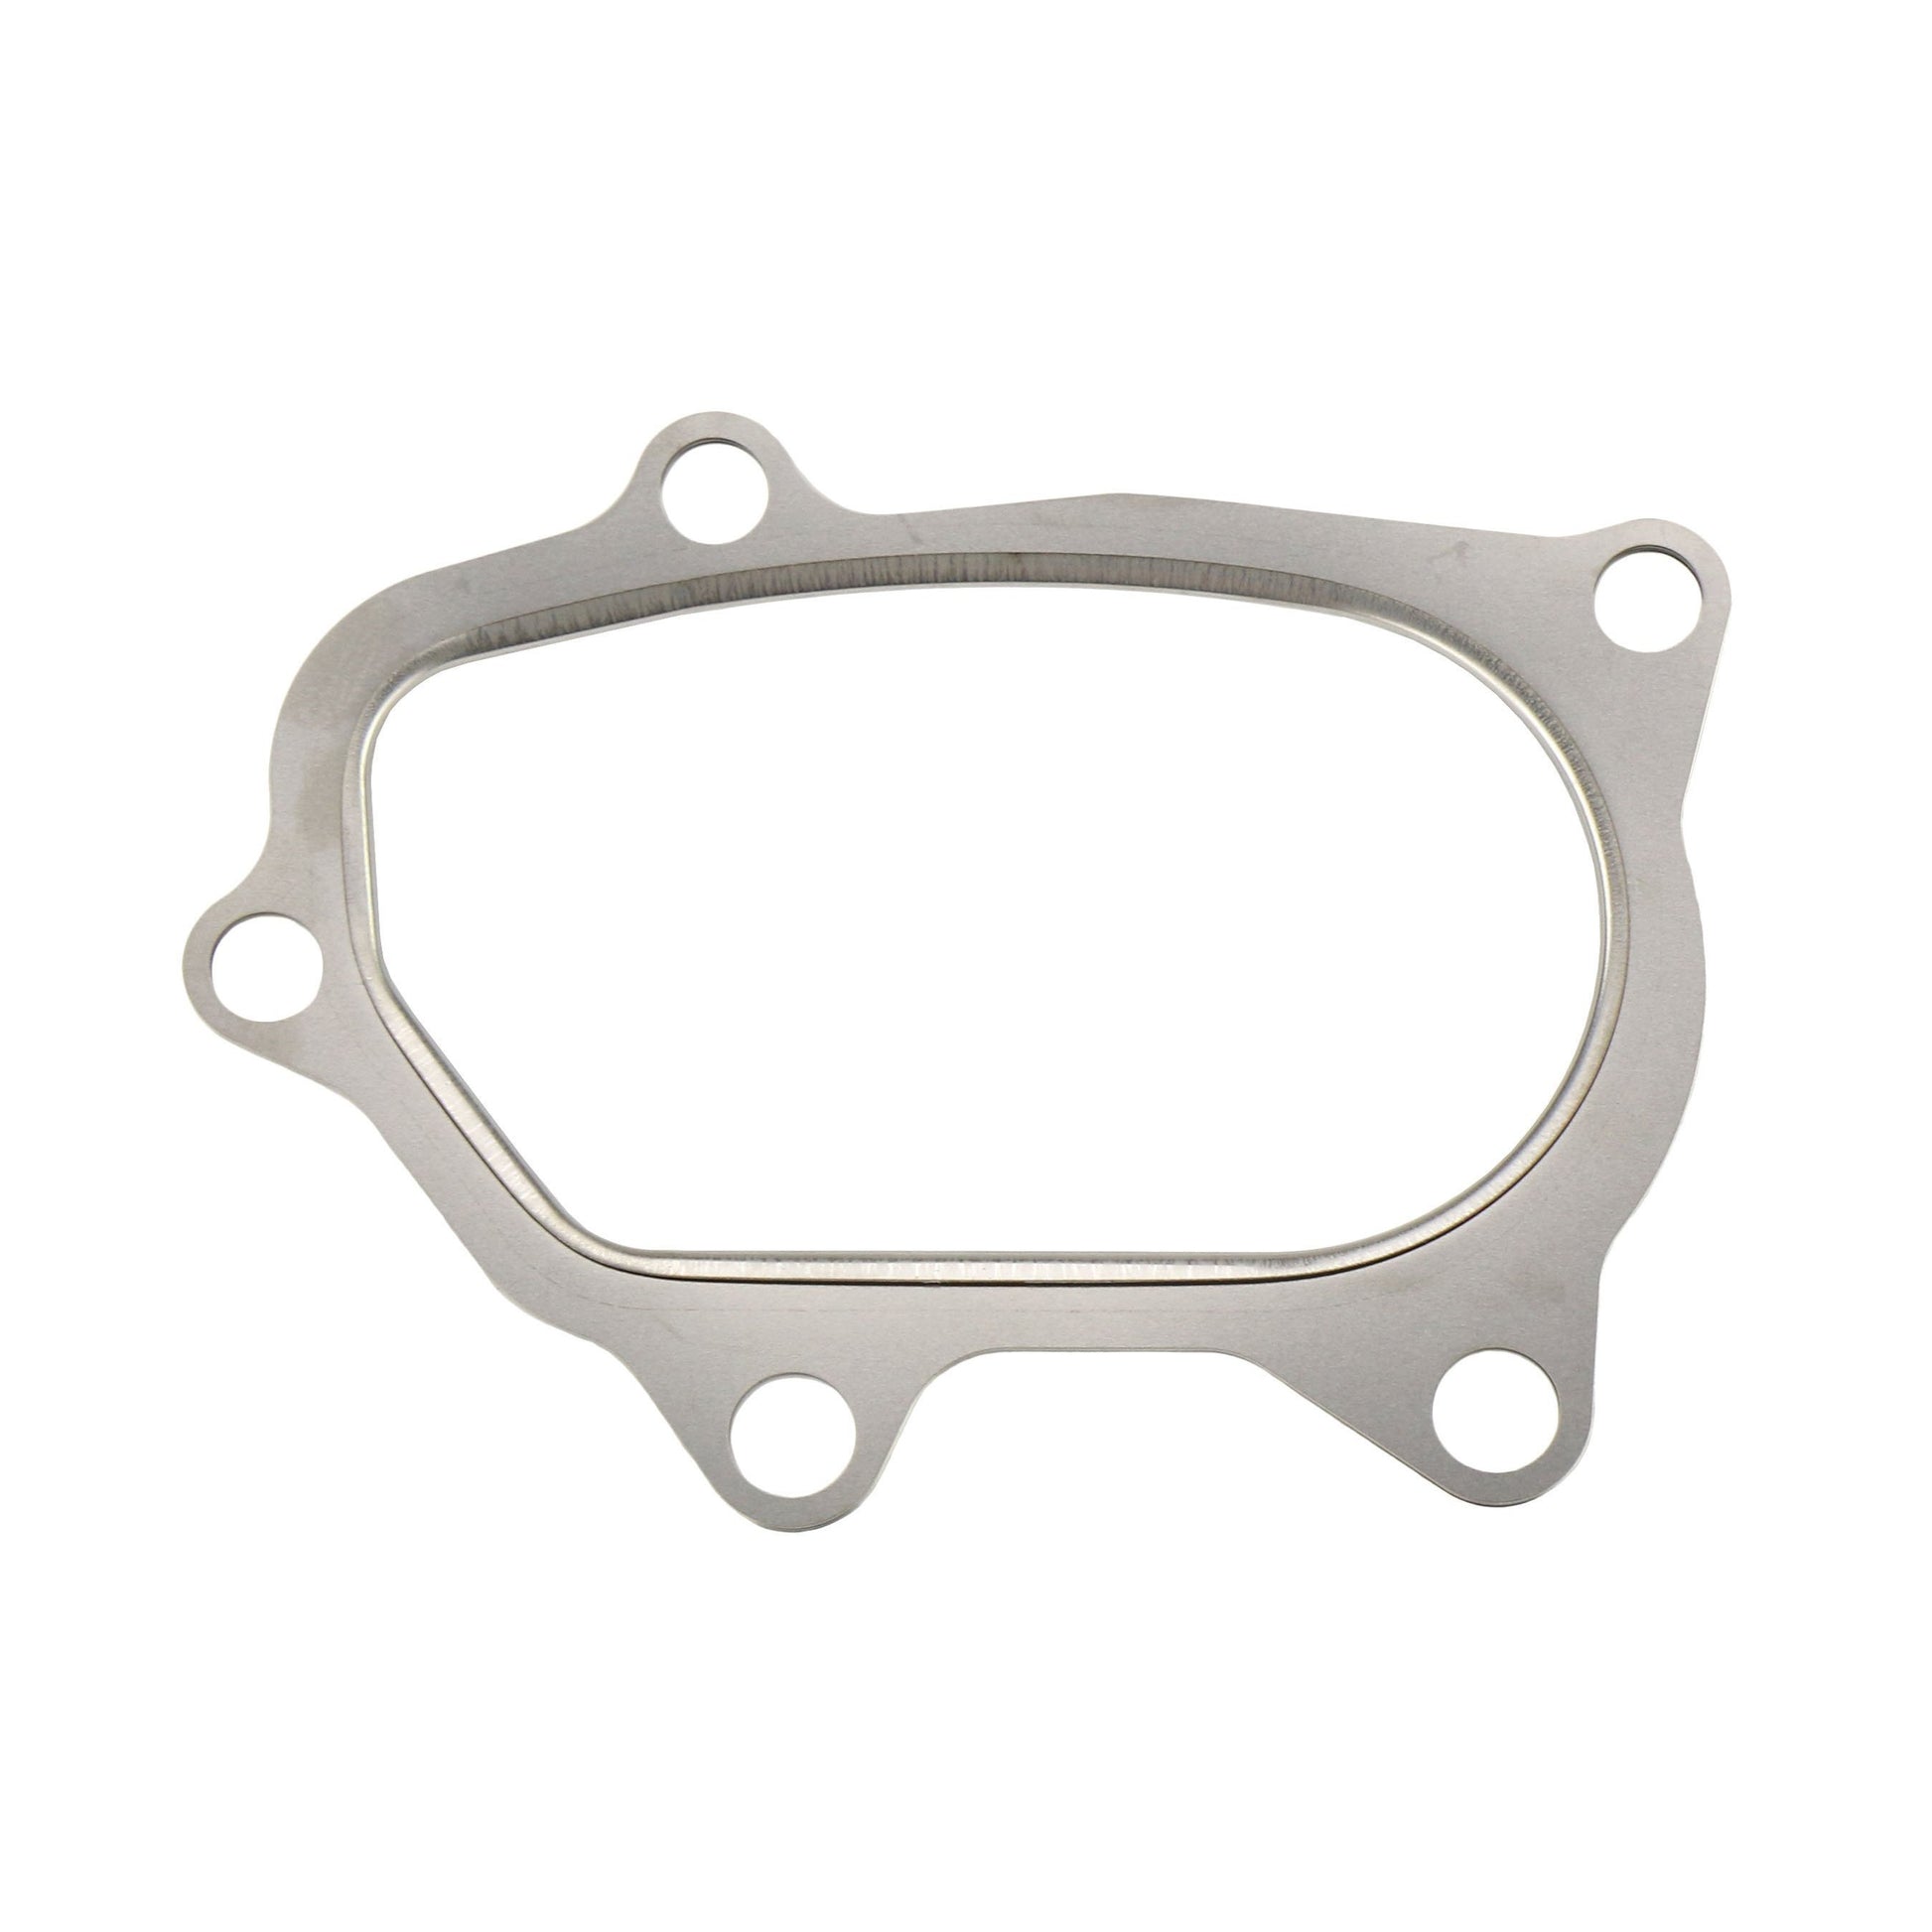 Faction Fab MLS Subaru EJ Turbo to Downpipe Gasket (1.10014.1)-FFA1.10014.1-1.10014.1-Exhaust Gaskets and Hardware-FactionFab-JDMuscle